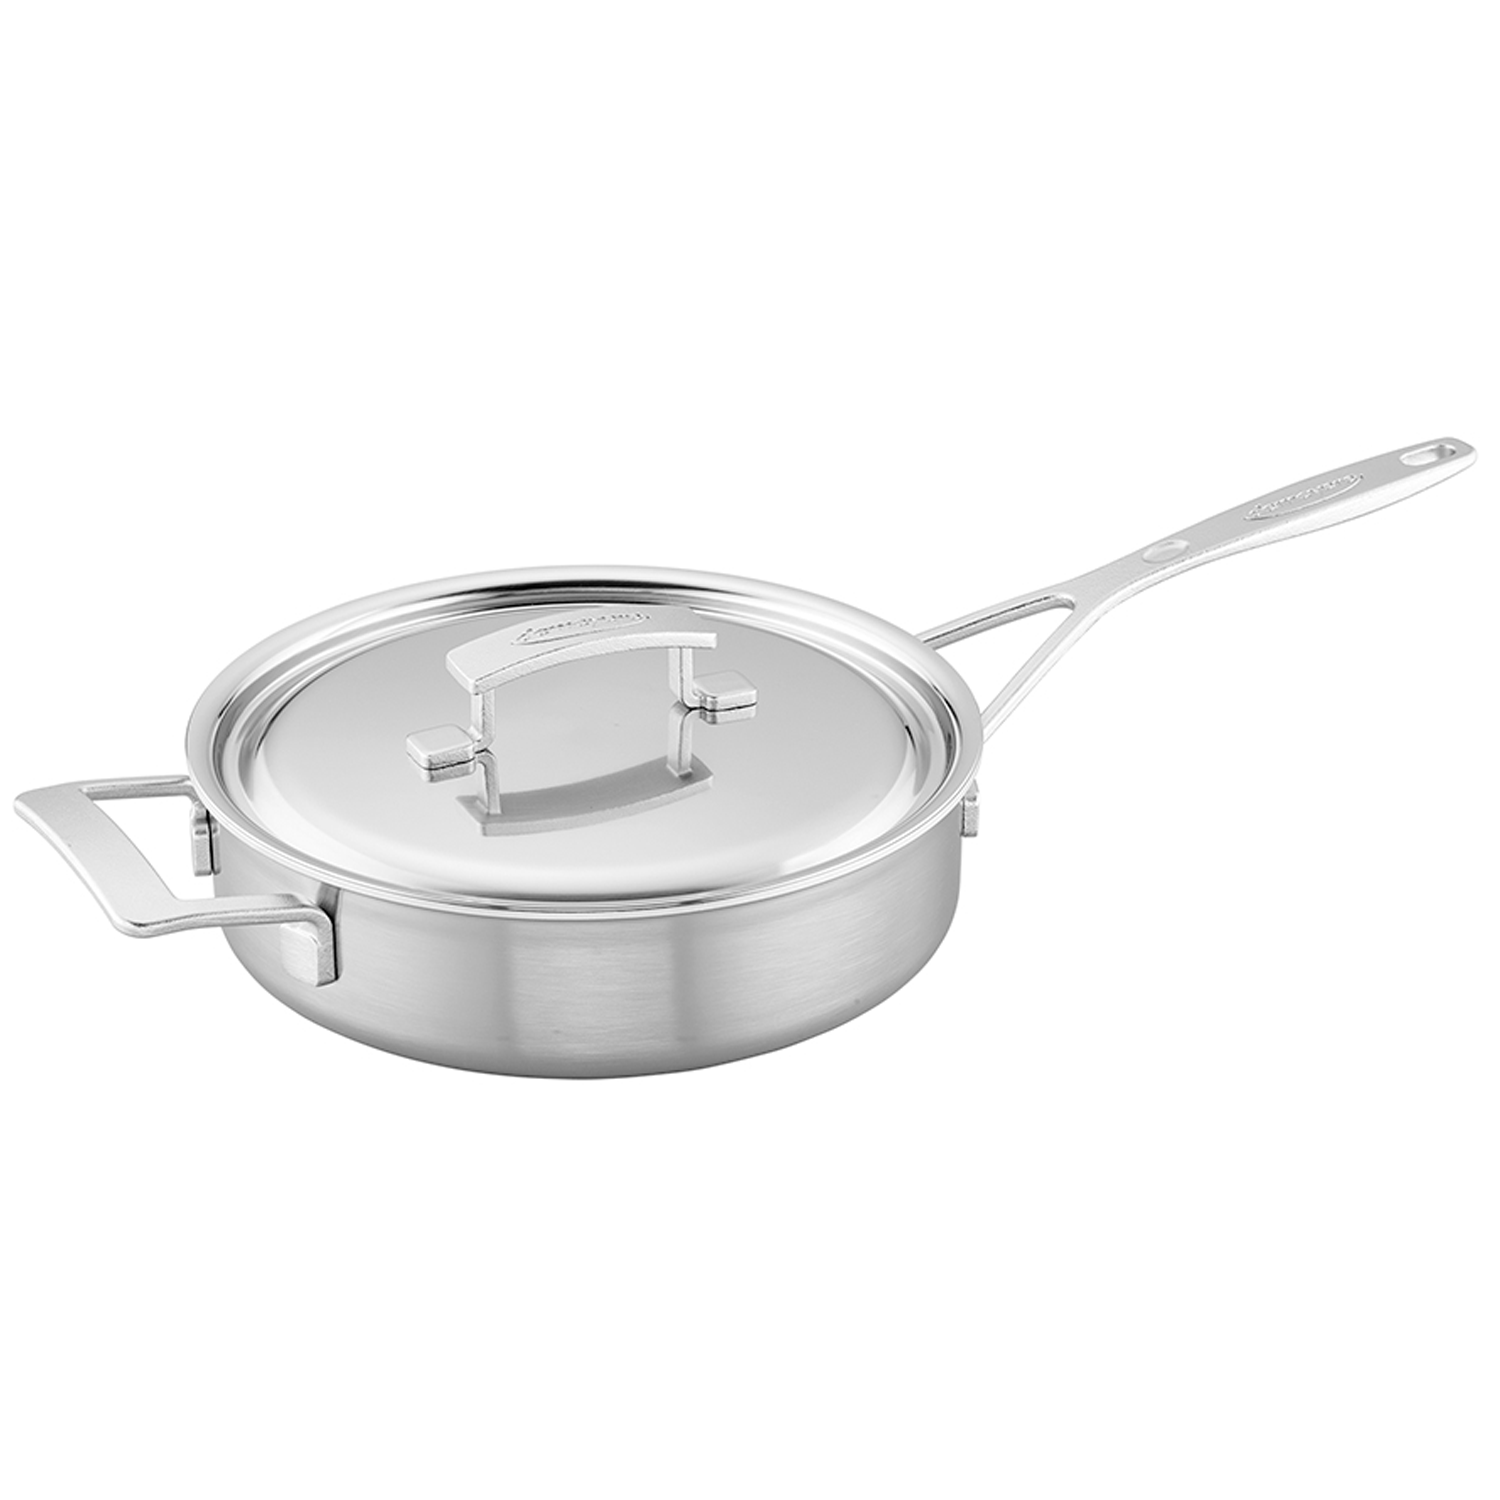 5-Ply Stainless Steel Frying Pan